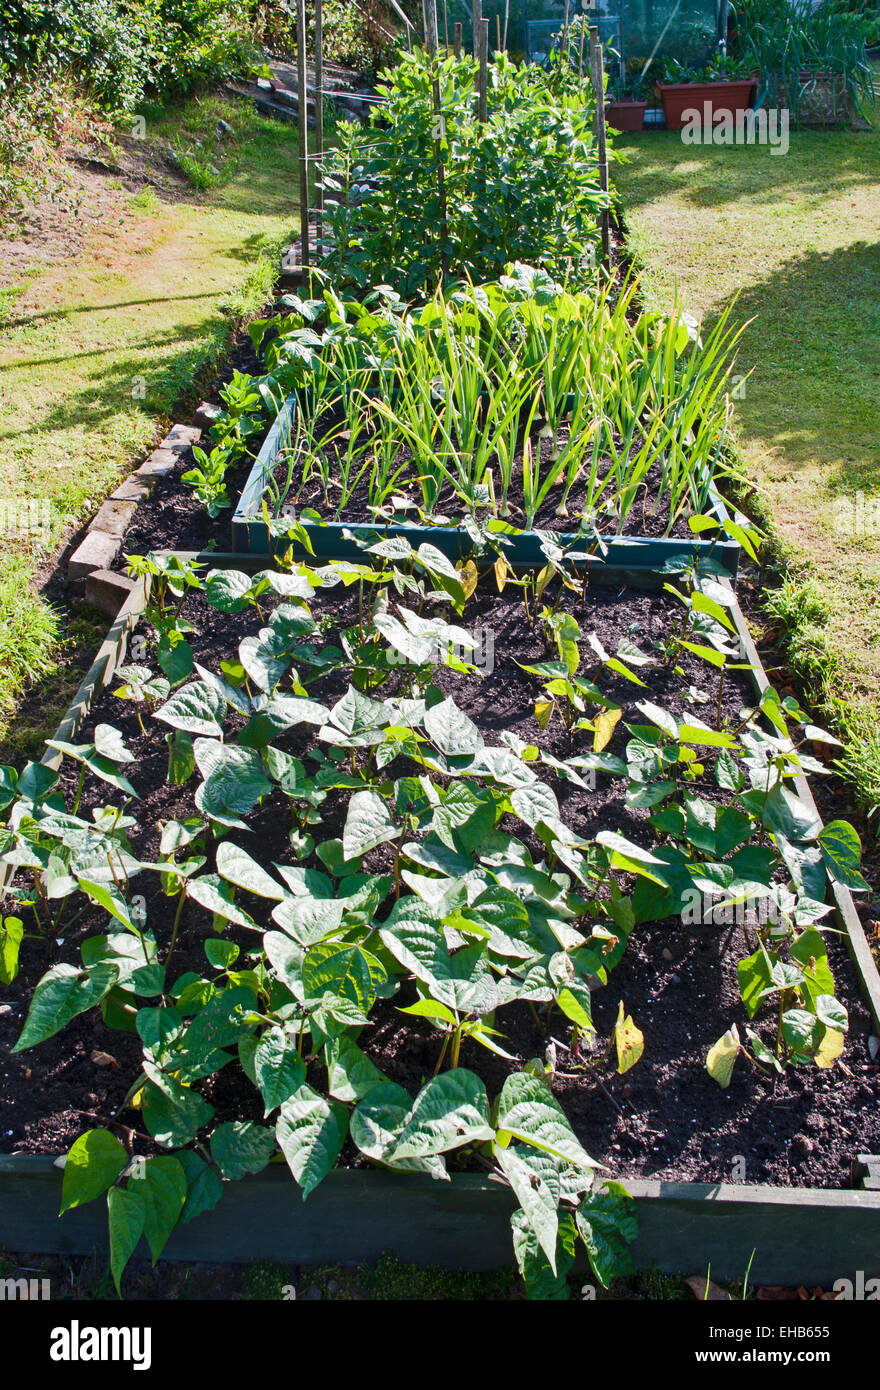 Beans and onions growing in raised beds with grass surround in summer sunshine, domestic garden, UK Stock Photo